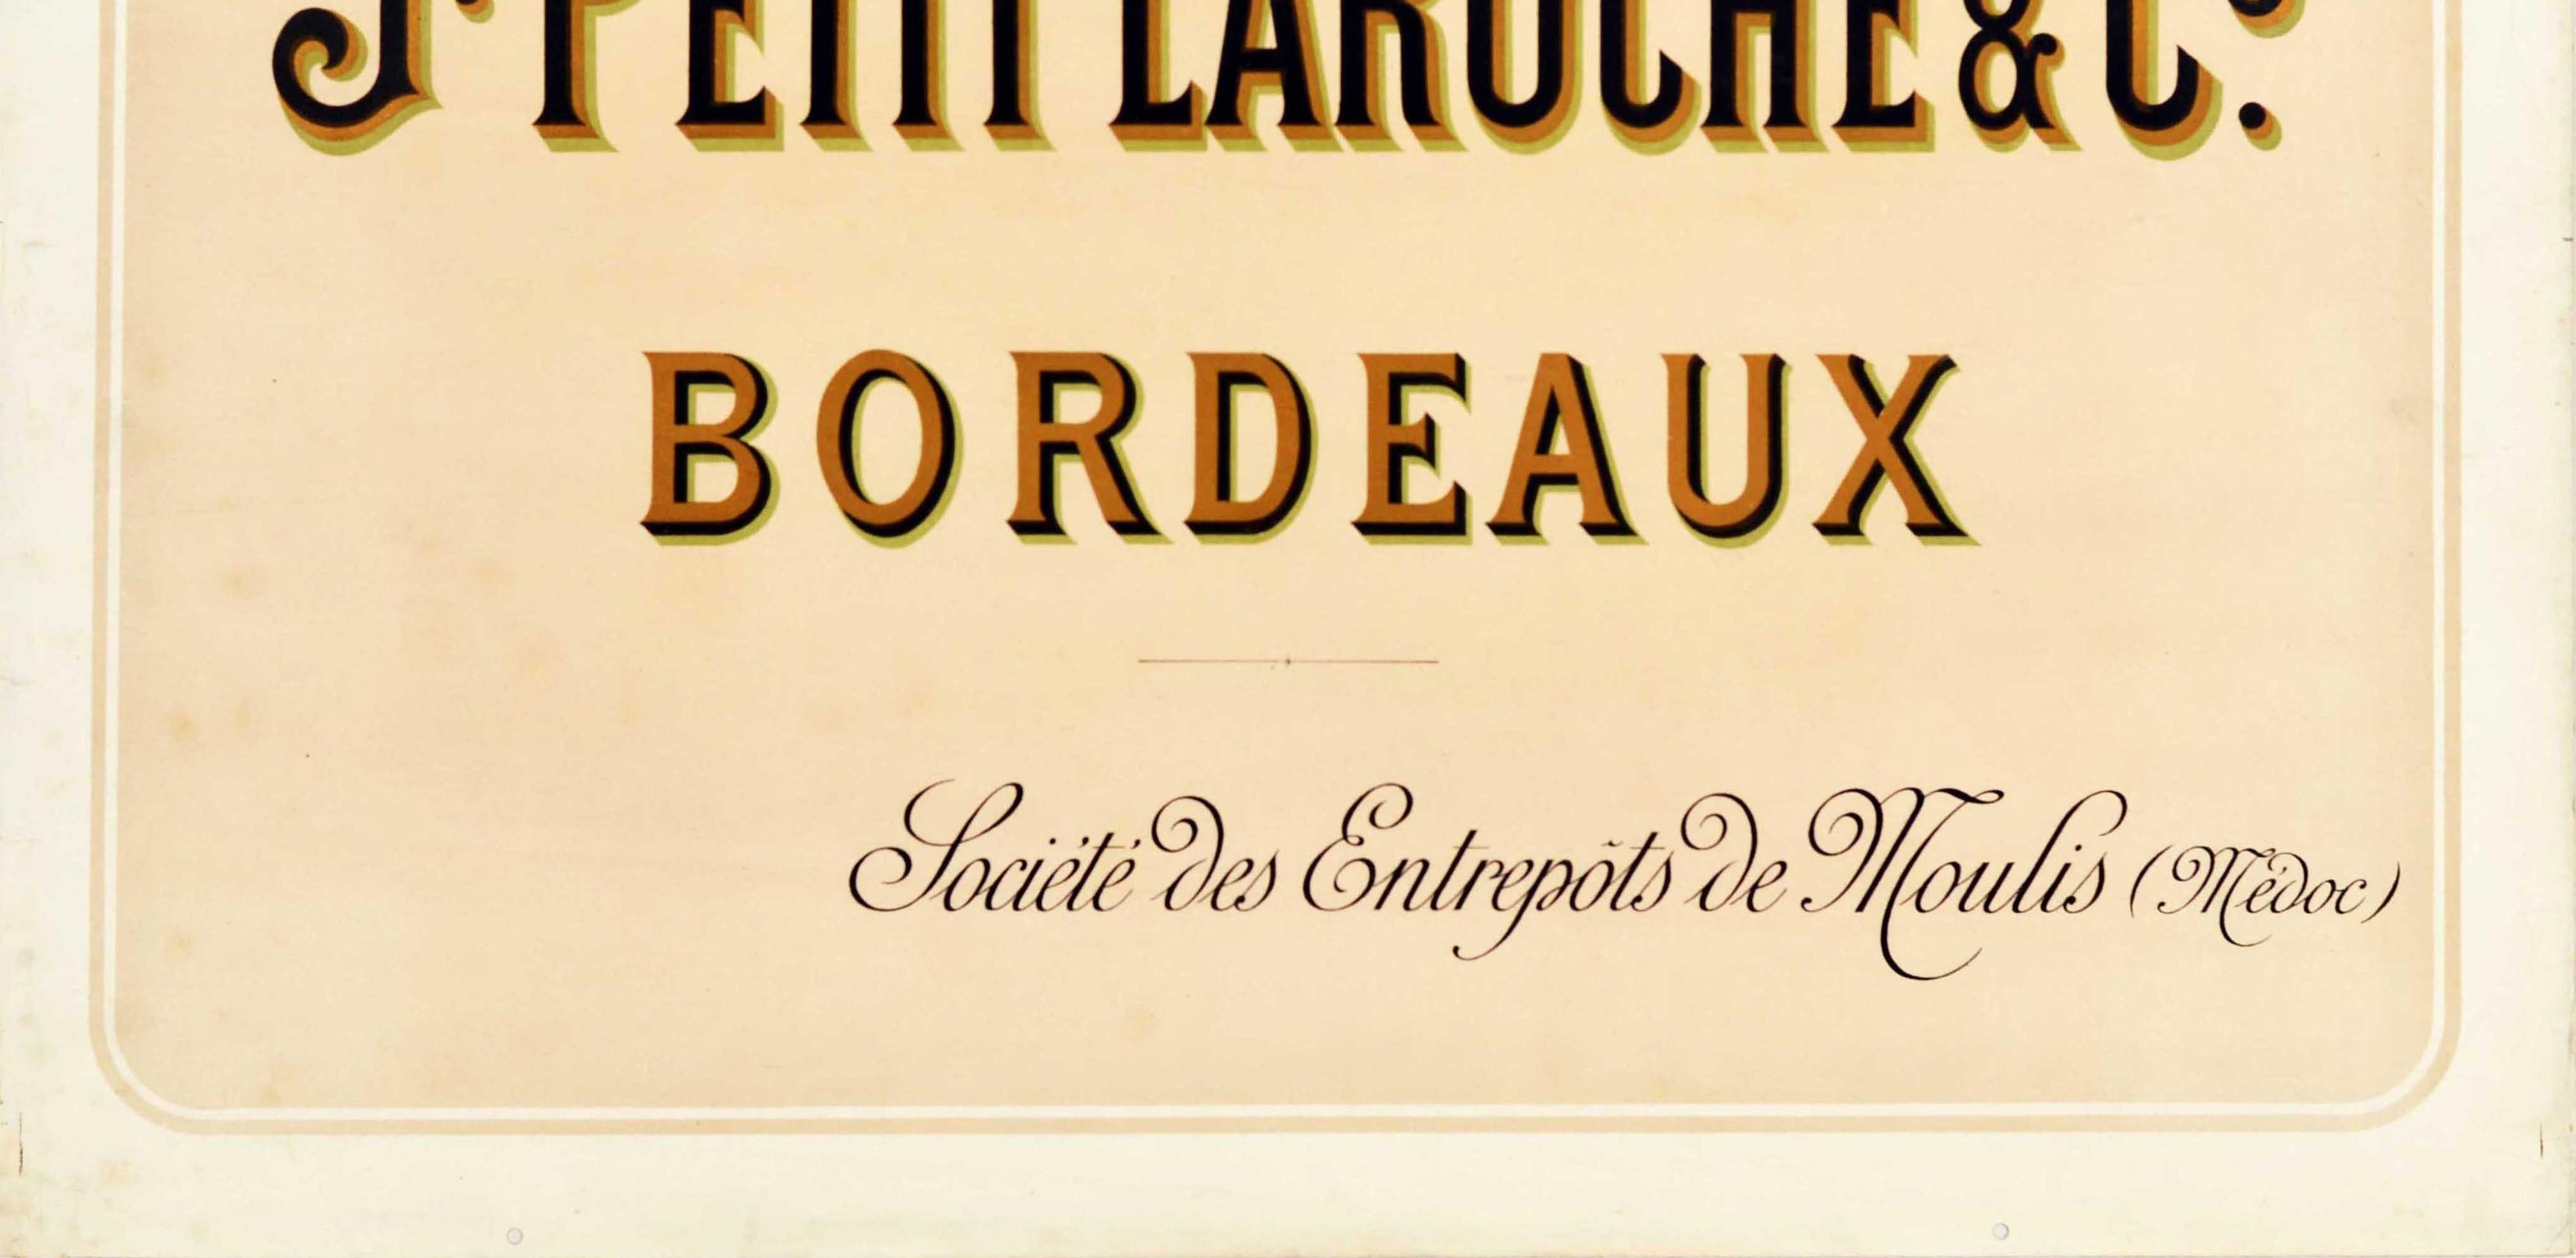 Original Antique Drink Poster J. Petit Laroche & Co Bordeaux Wine France Medoc In Good Condition For Sale In London, GB